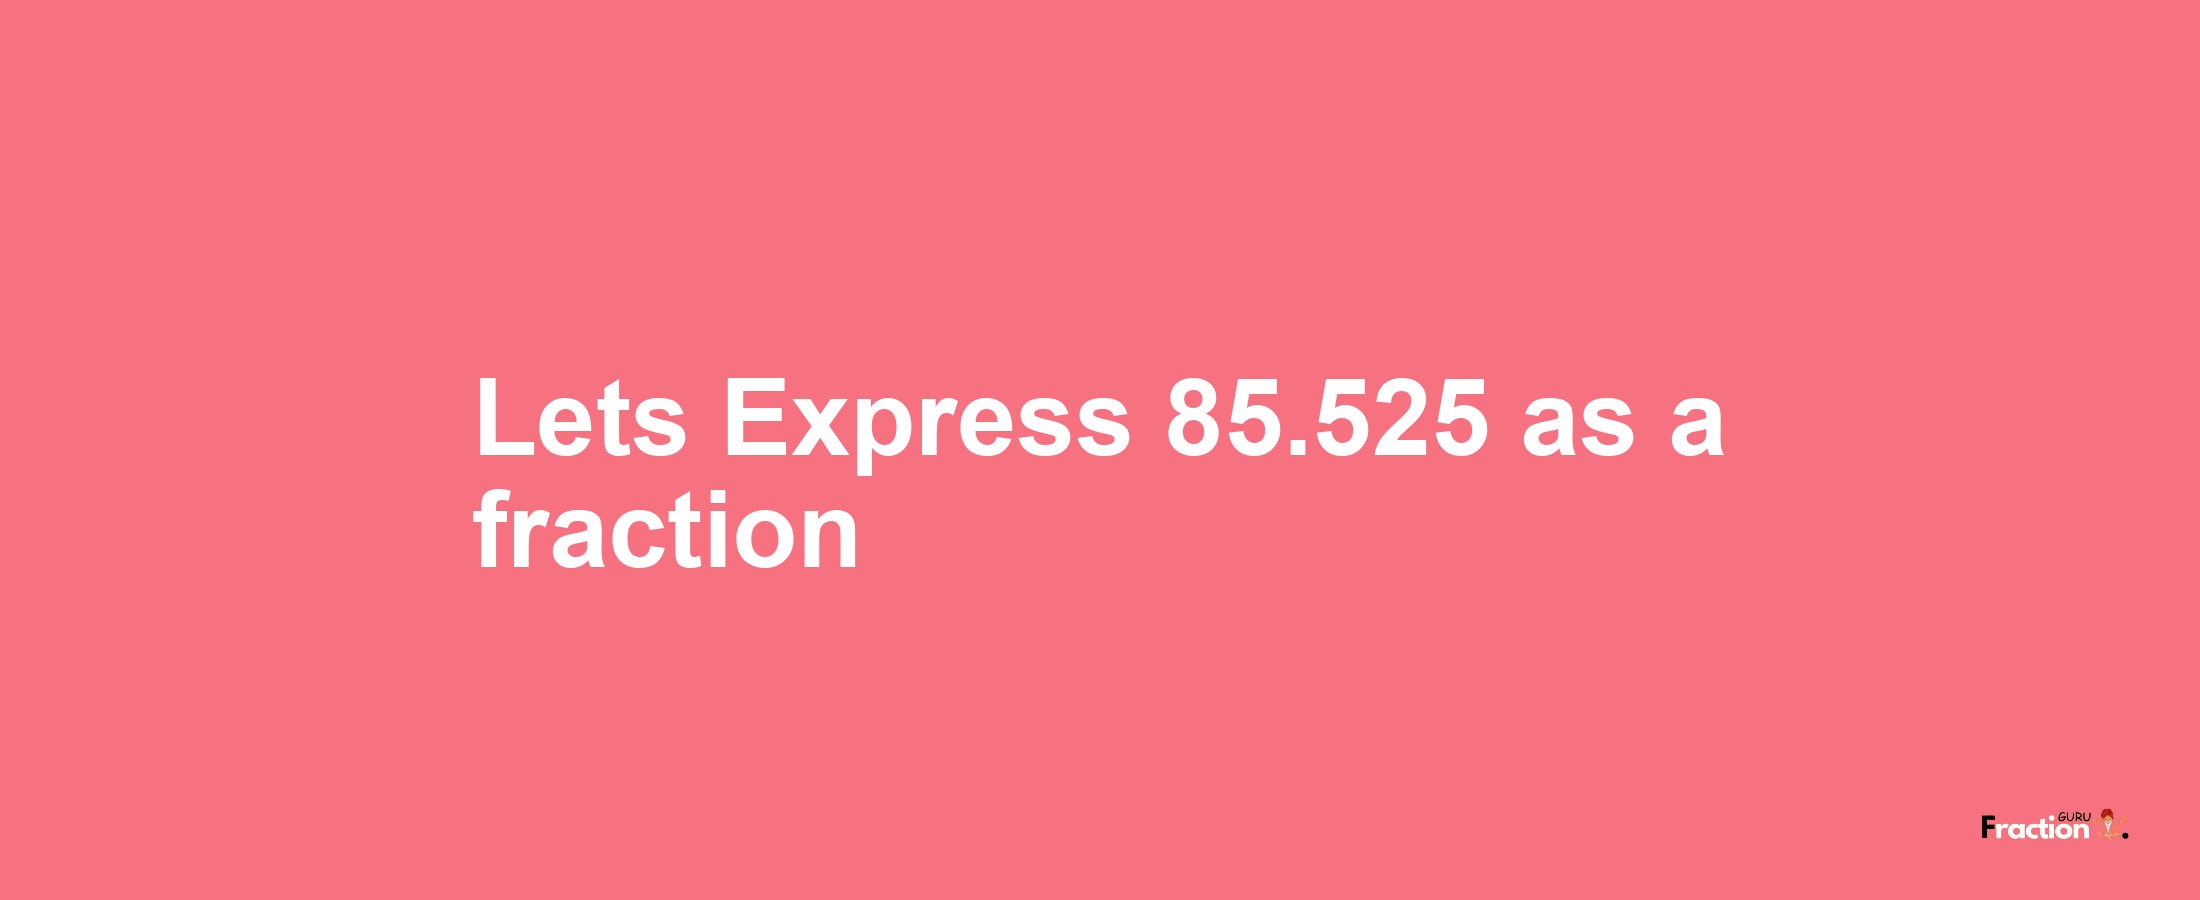 Lets Express 85.525 as afraction